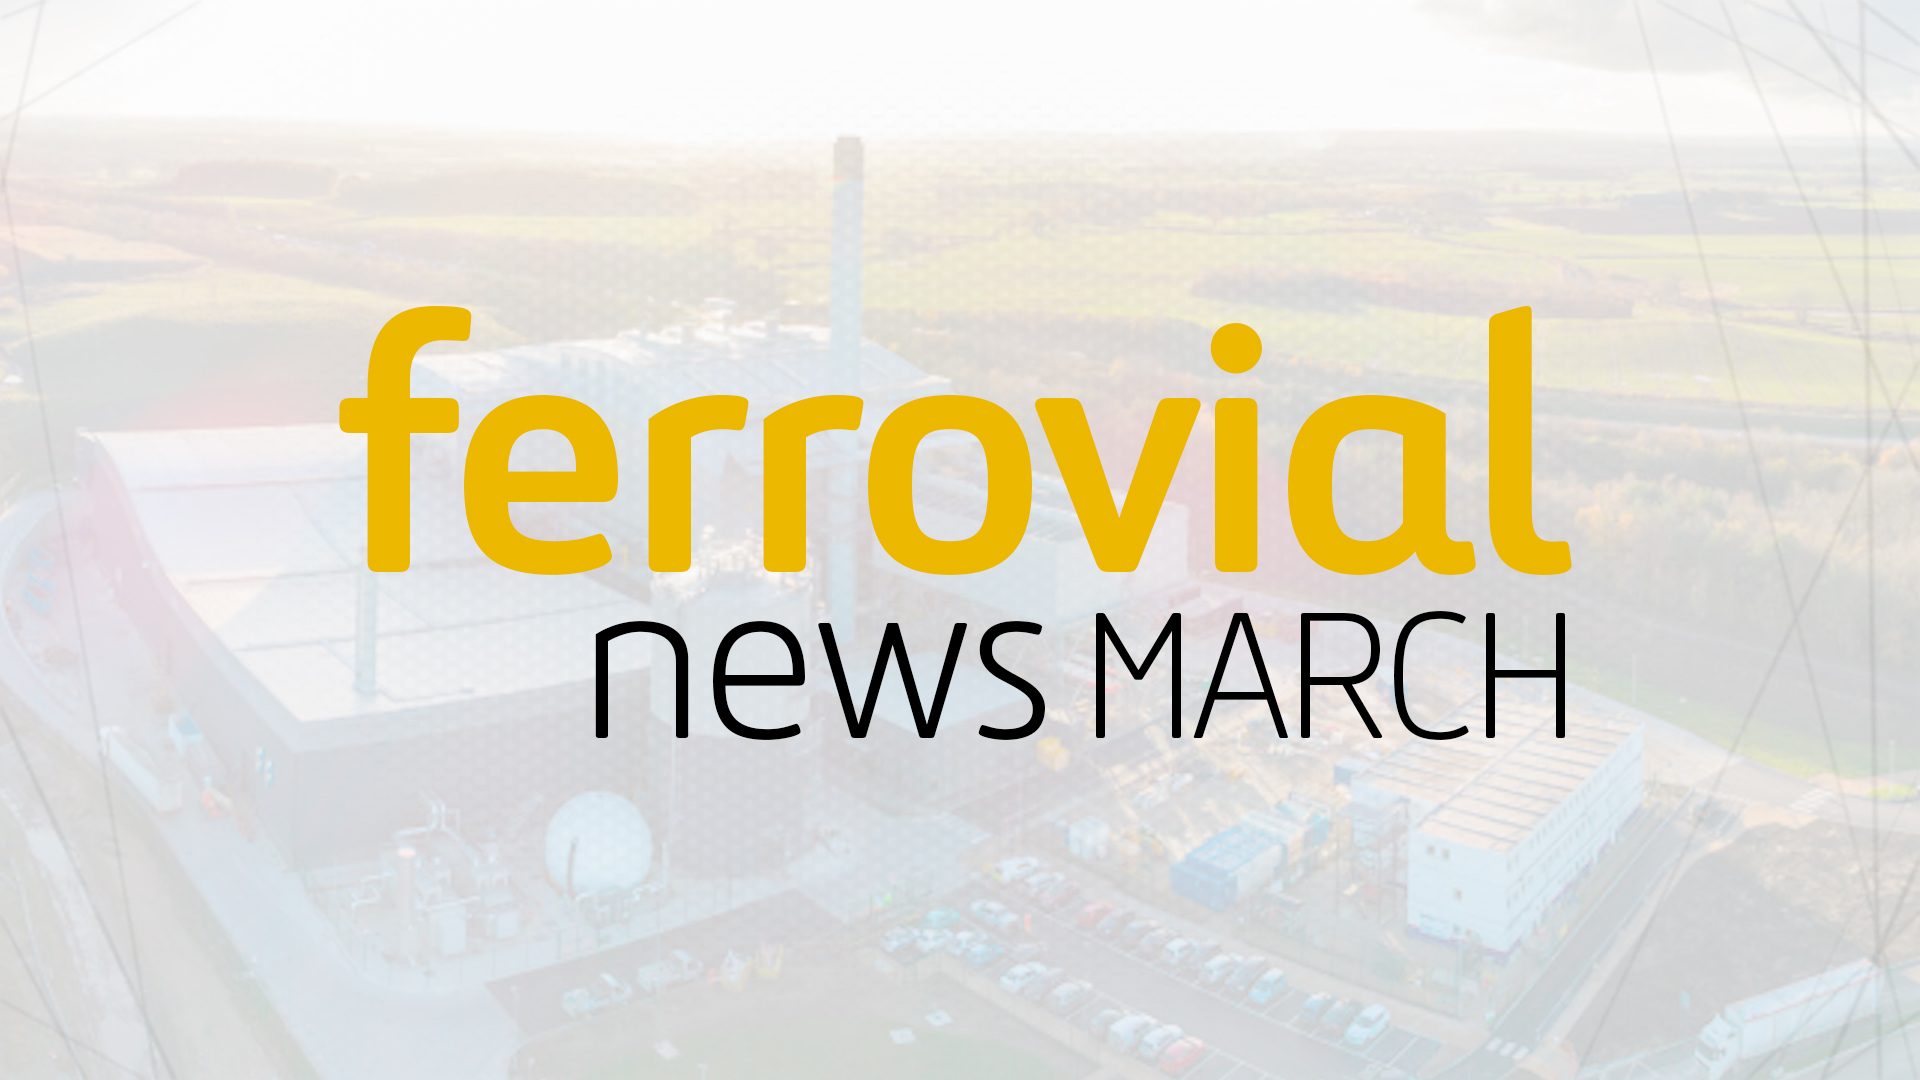 News highlights for March 2018 at Ferrovial